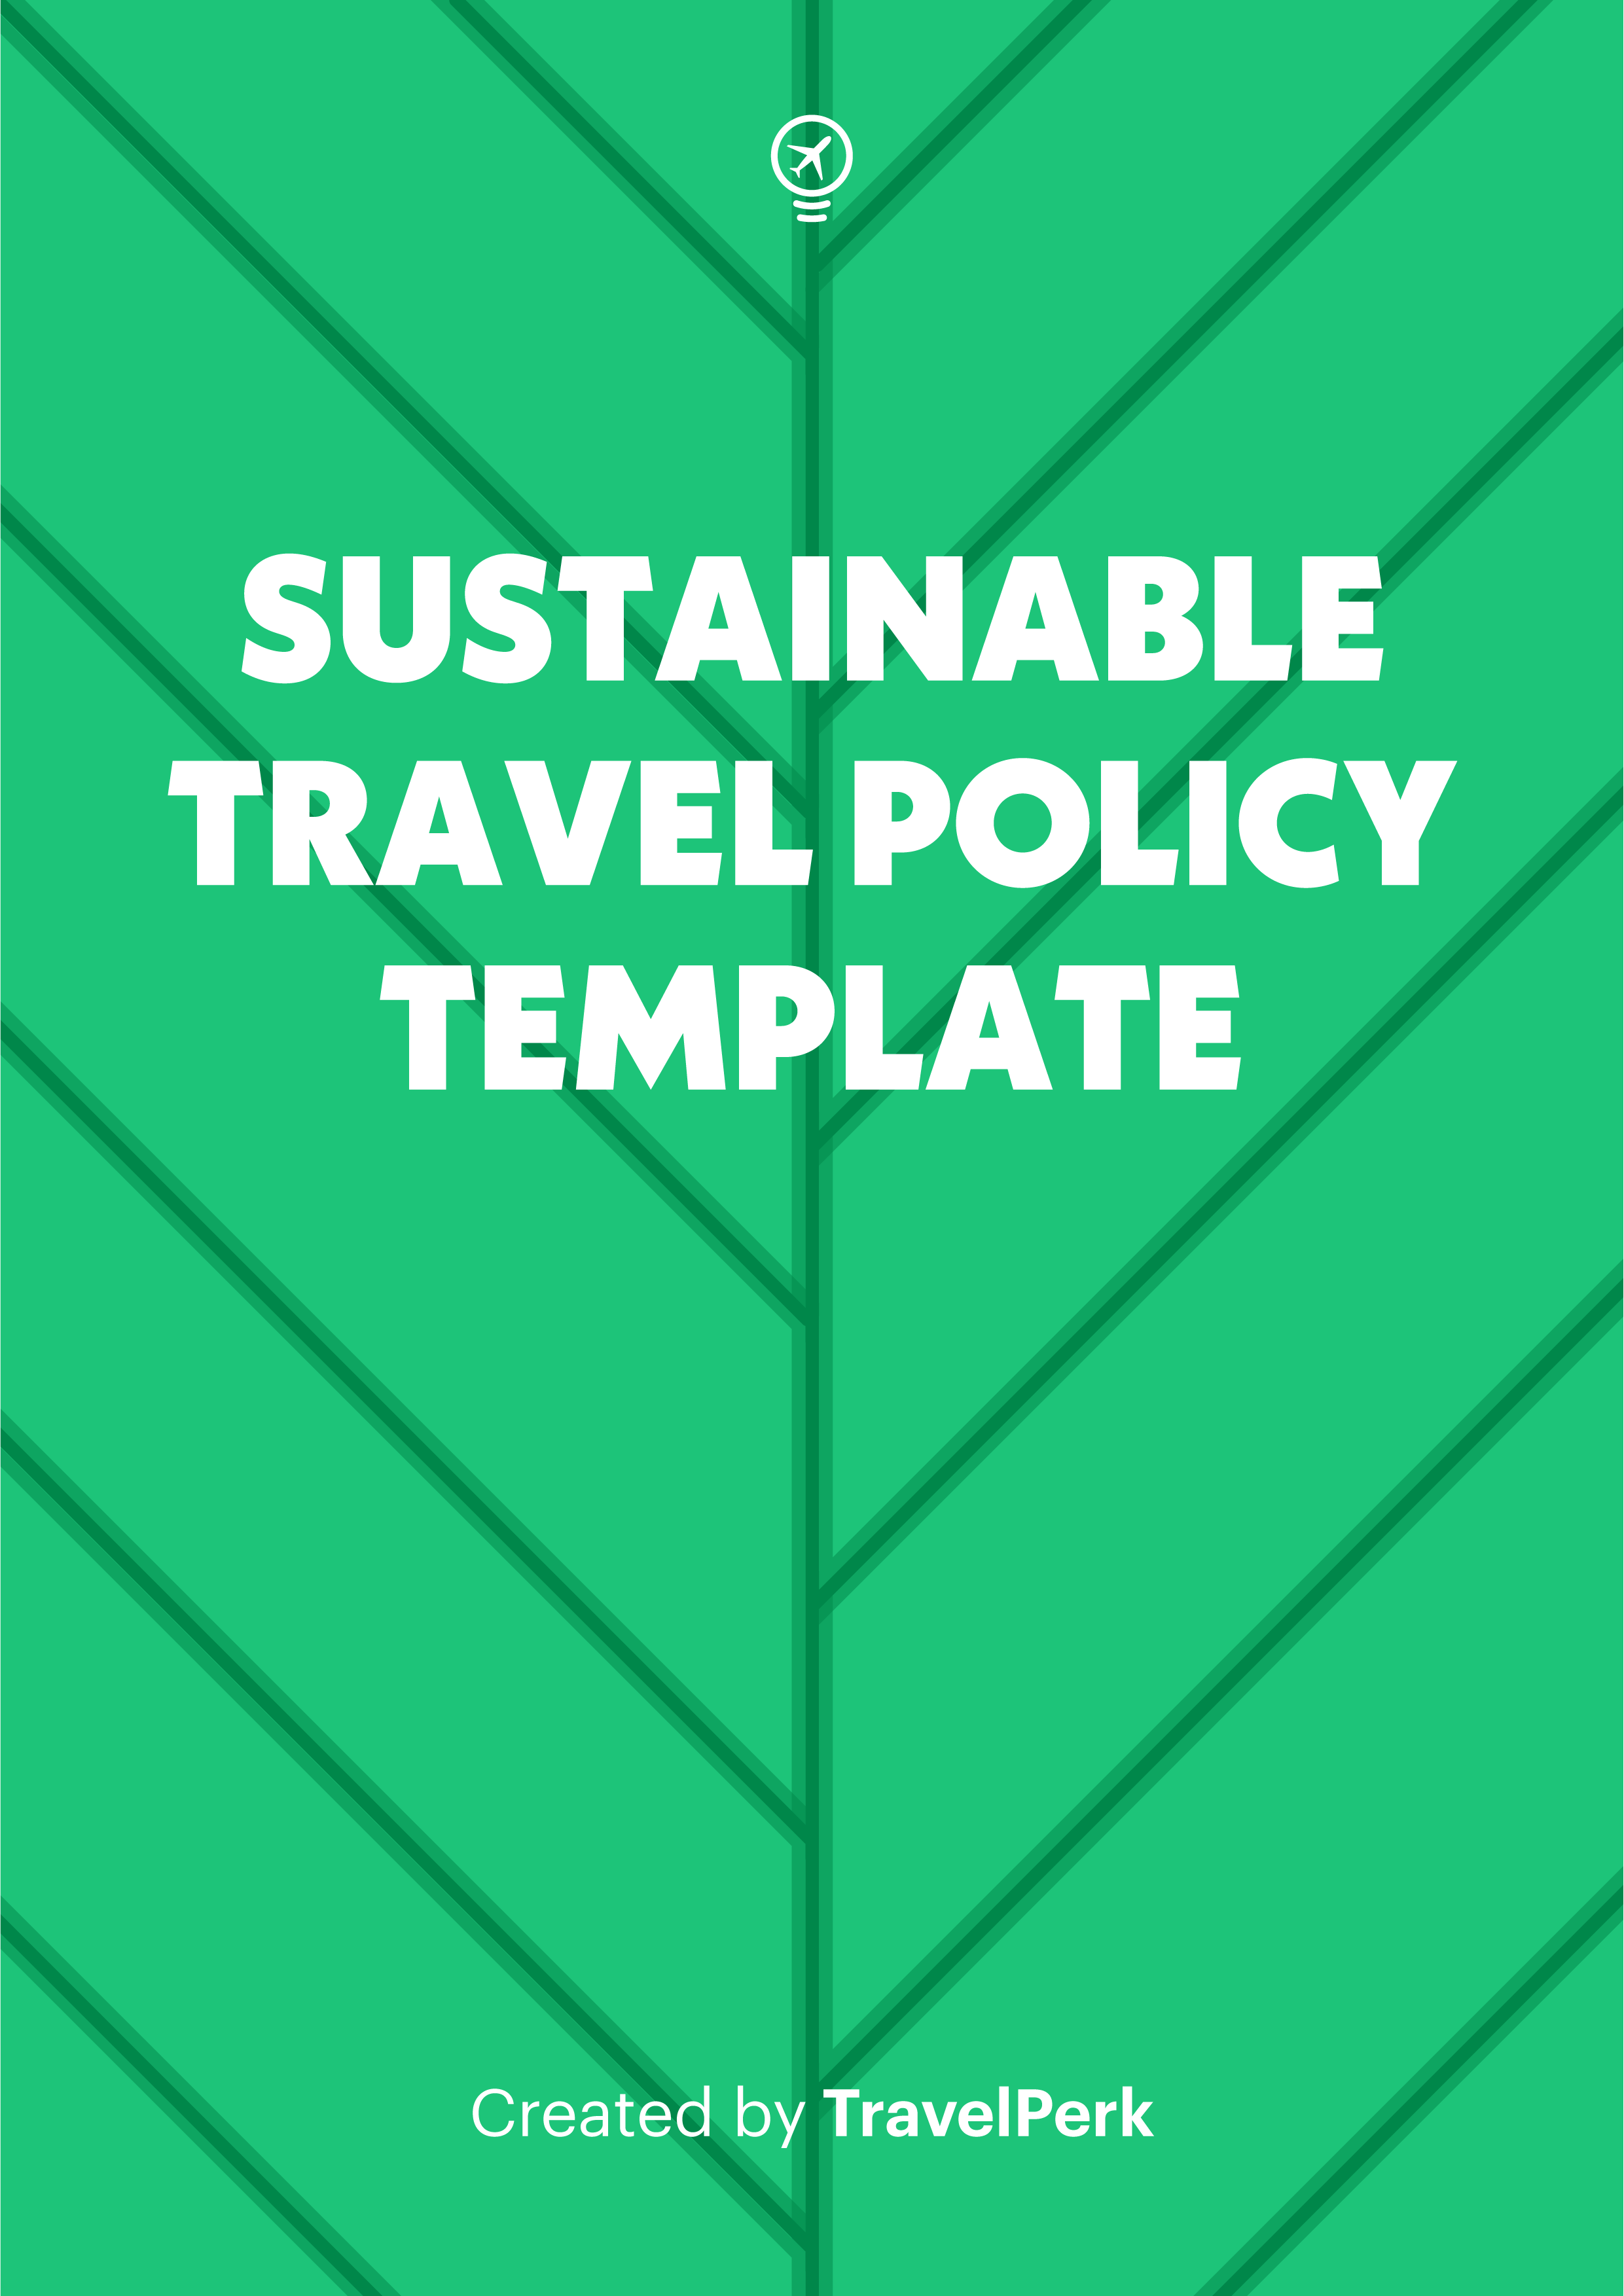 Sustainable travel policy template